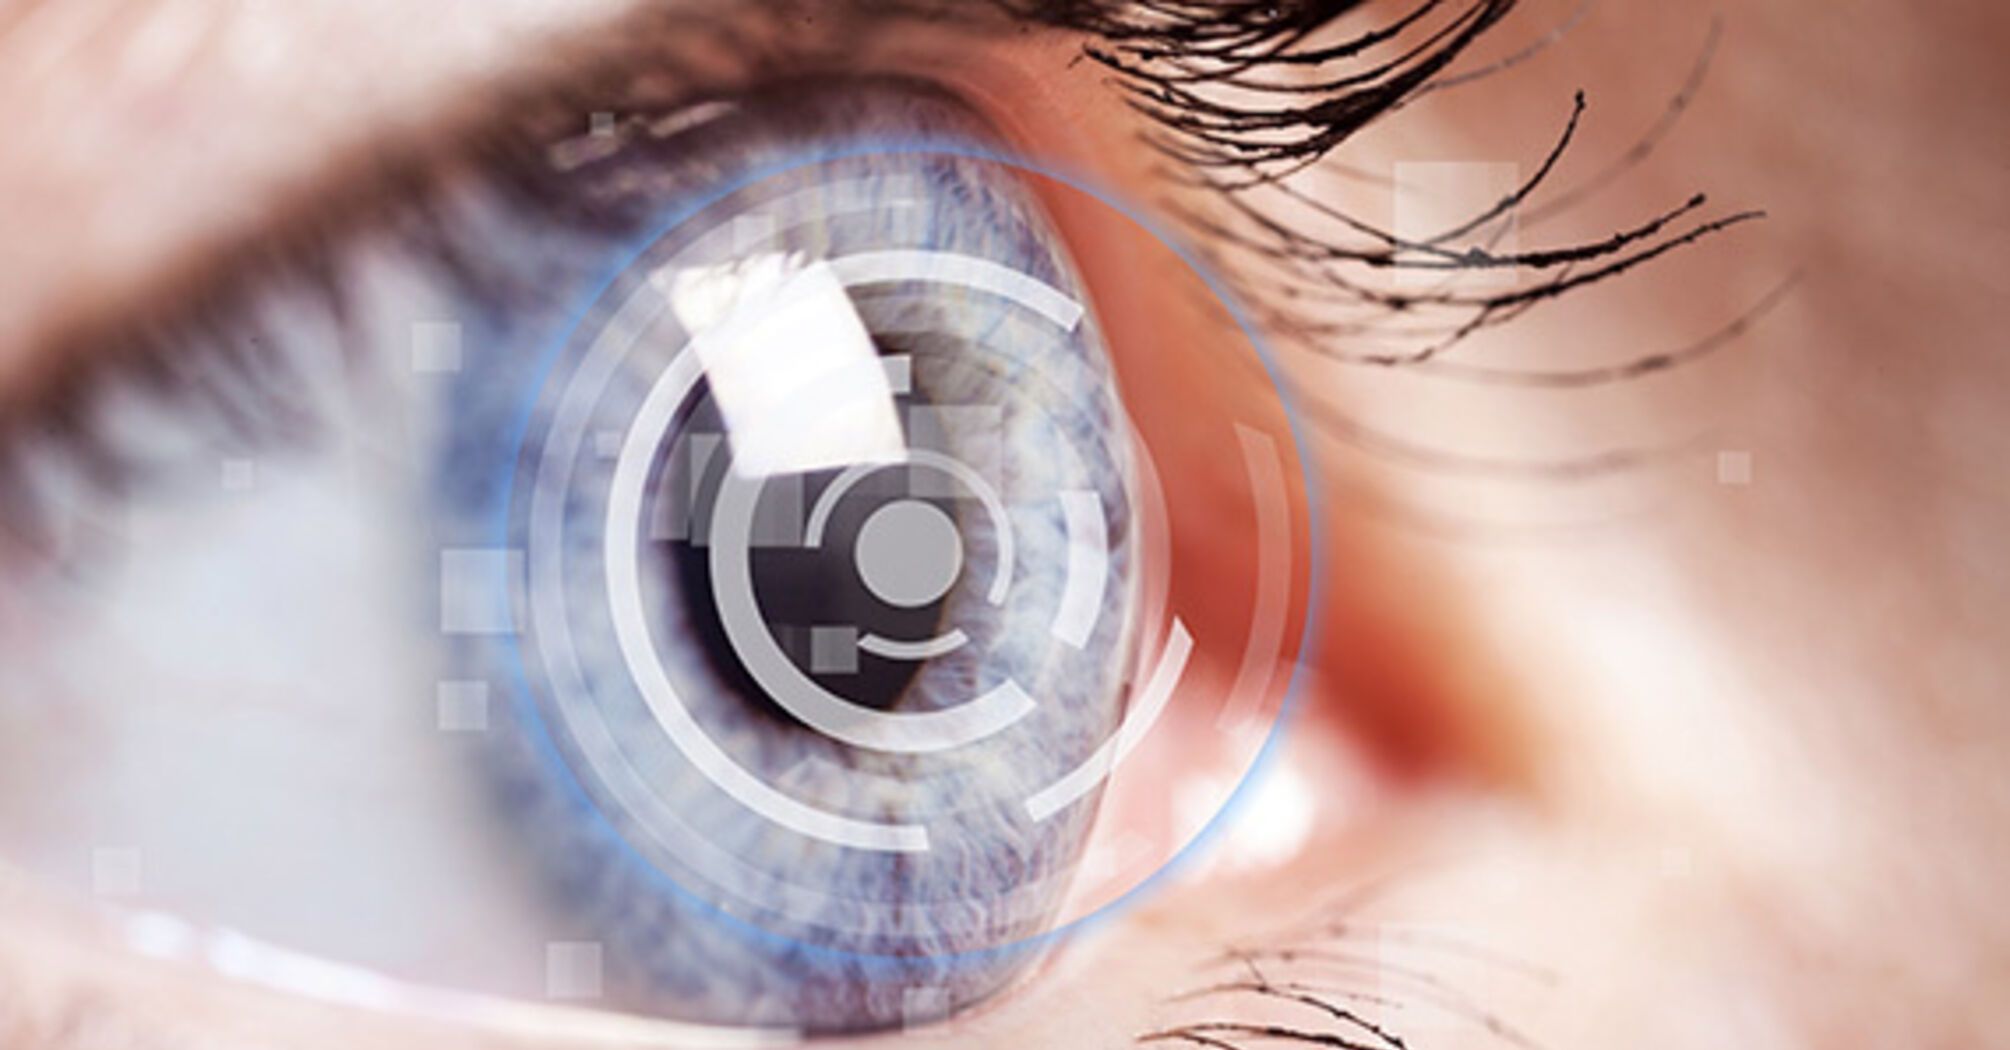 What is better for vision correction